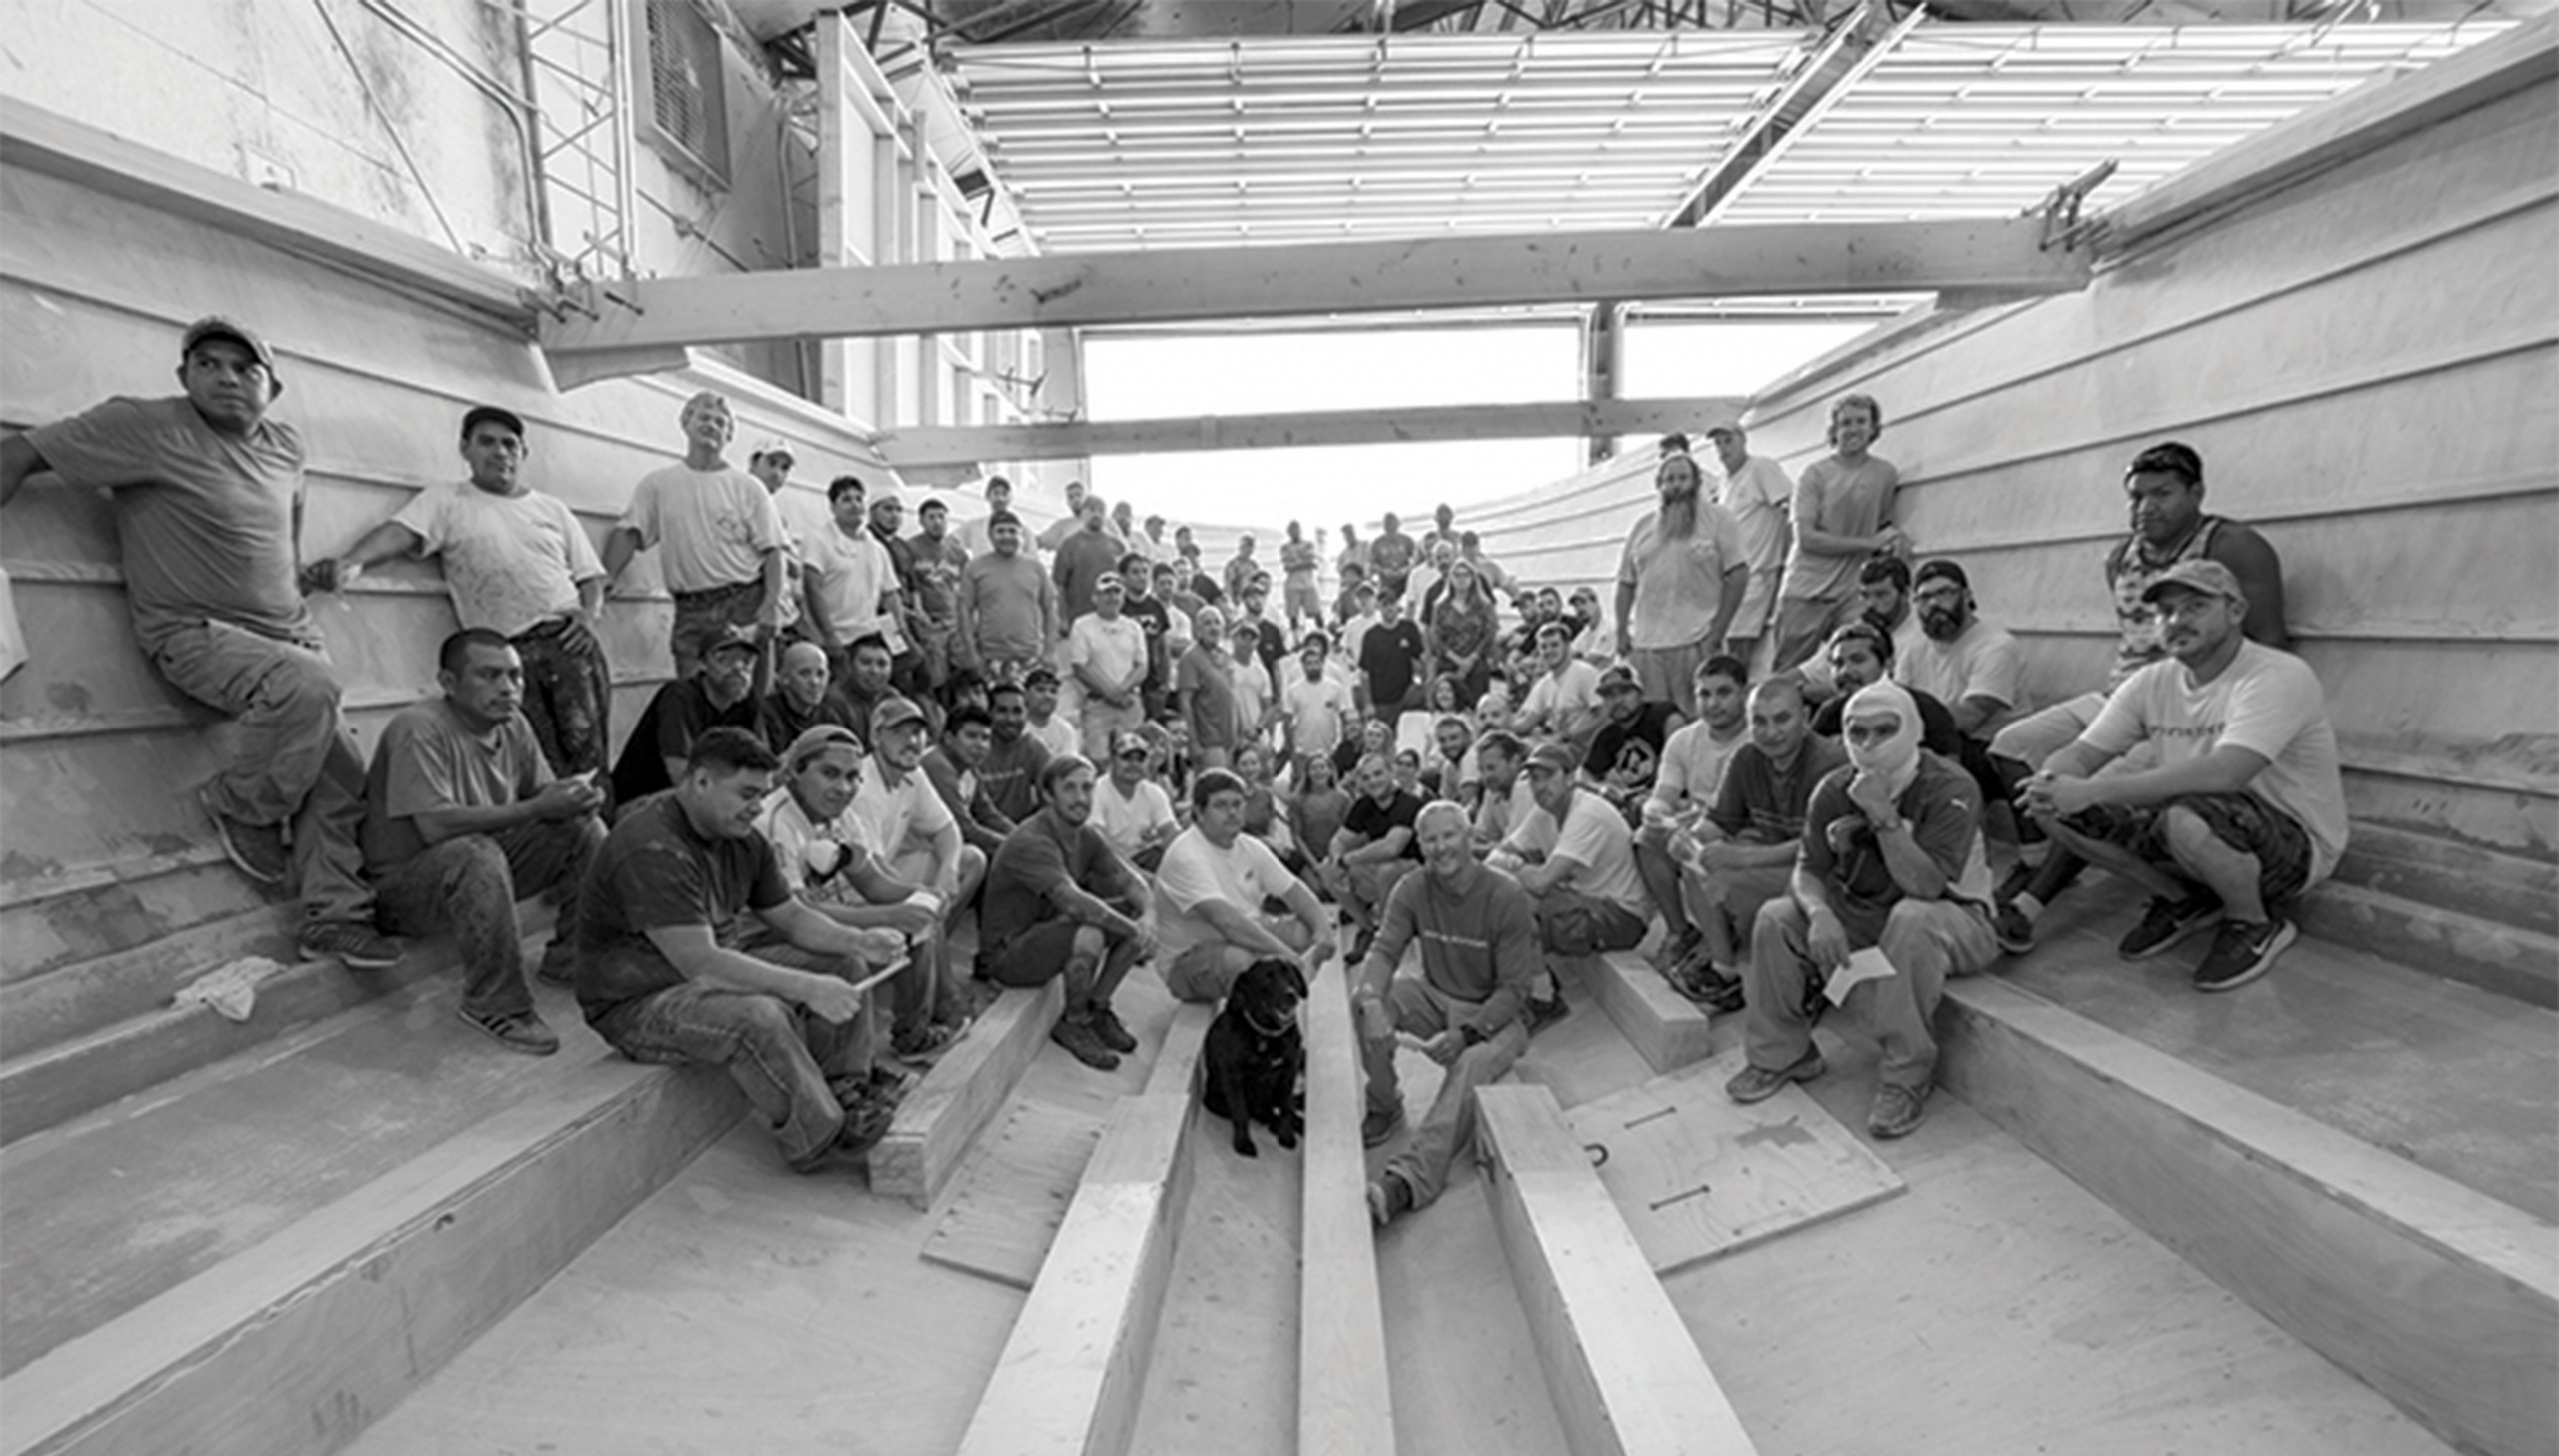 Black and white image of Bayliss Boatworks workers posing for a picture inside a hull